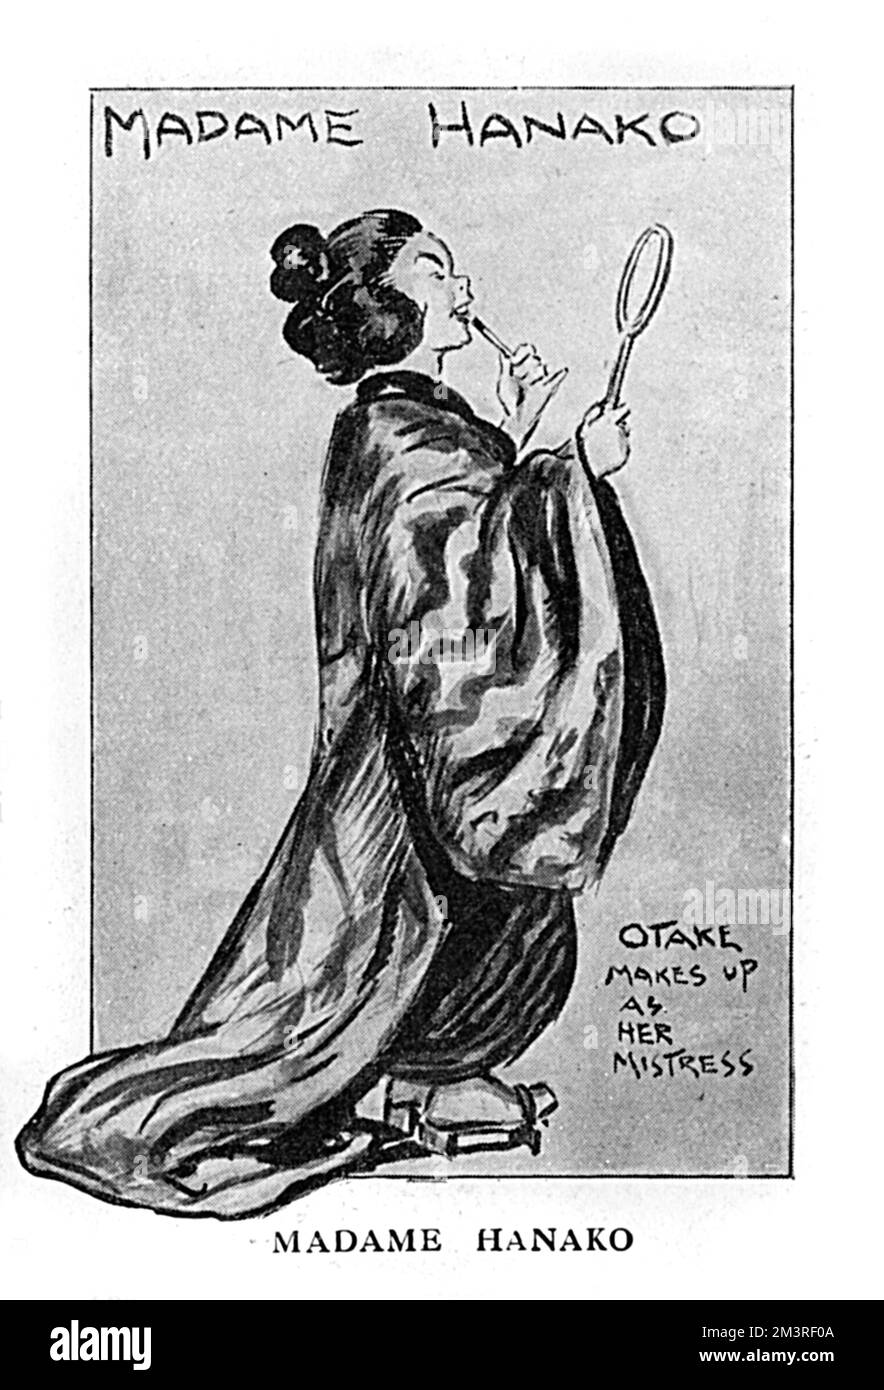 A caricature of the Japanese actress Madame Hanako in the one-act play Otake.     Date: 1914 Stock Photo